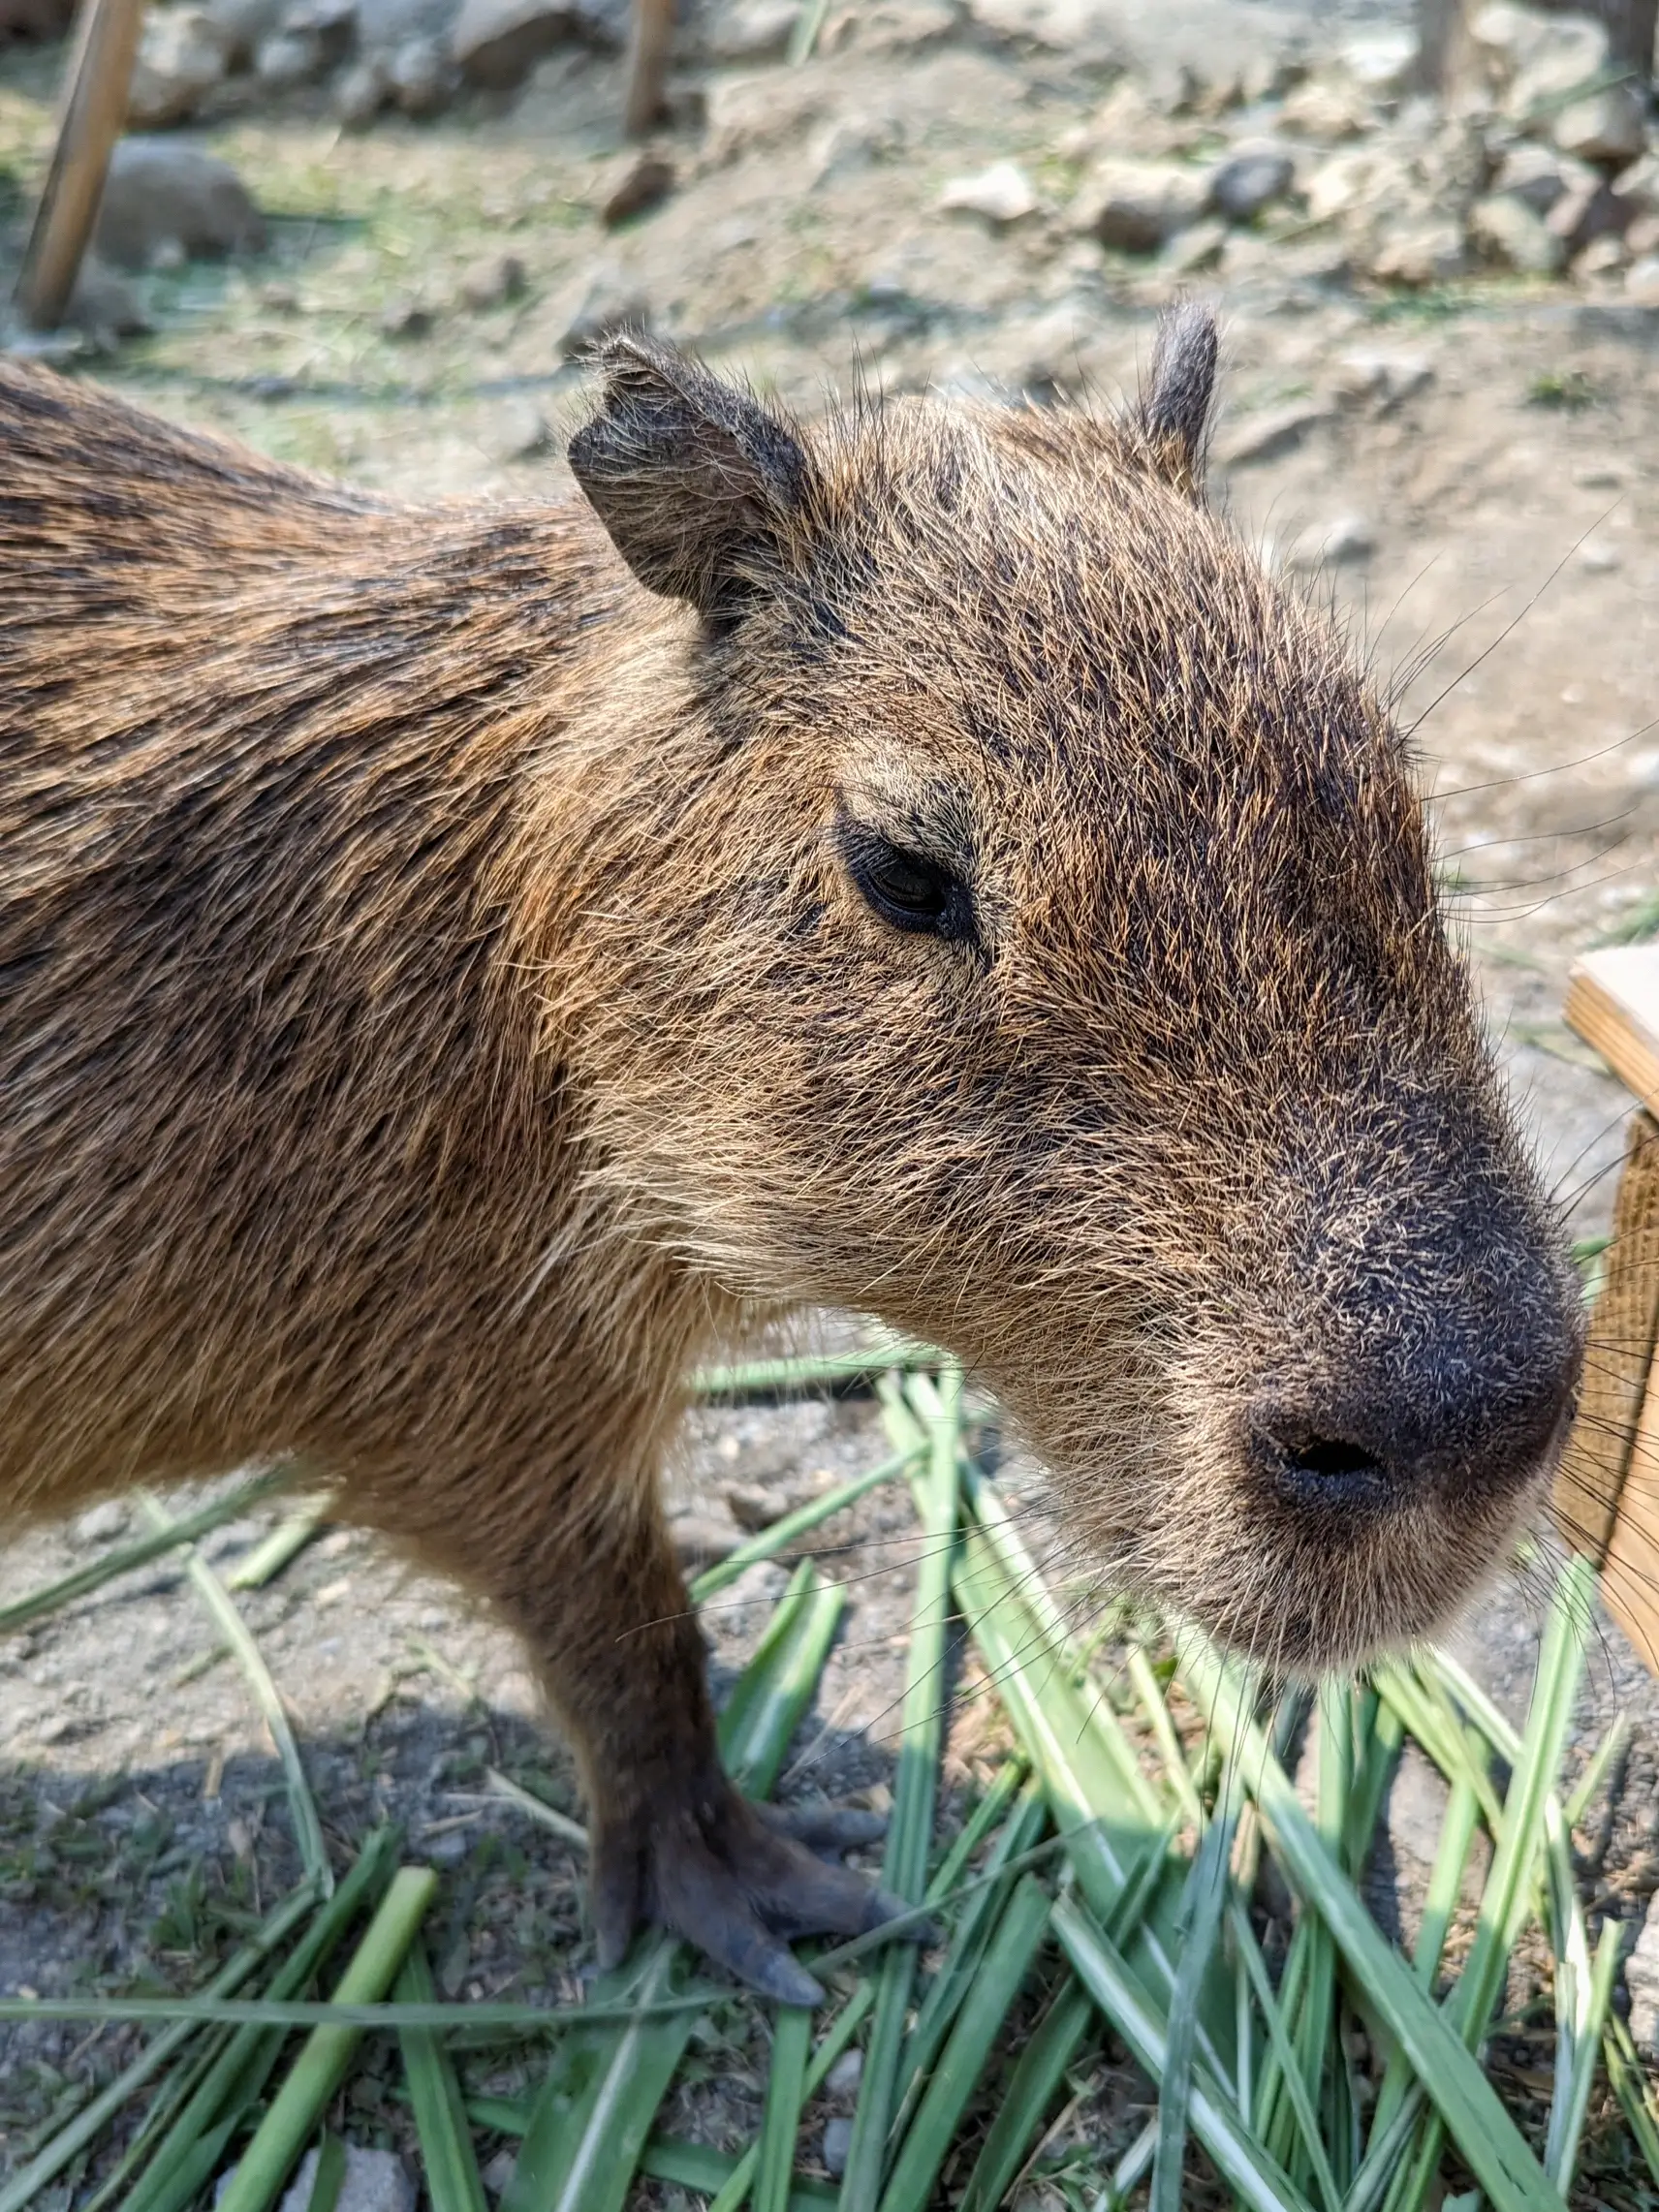 Capybara sensation: Why a rodent is winning hearts of millions of